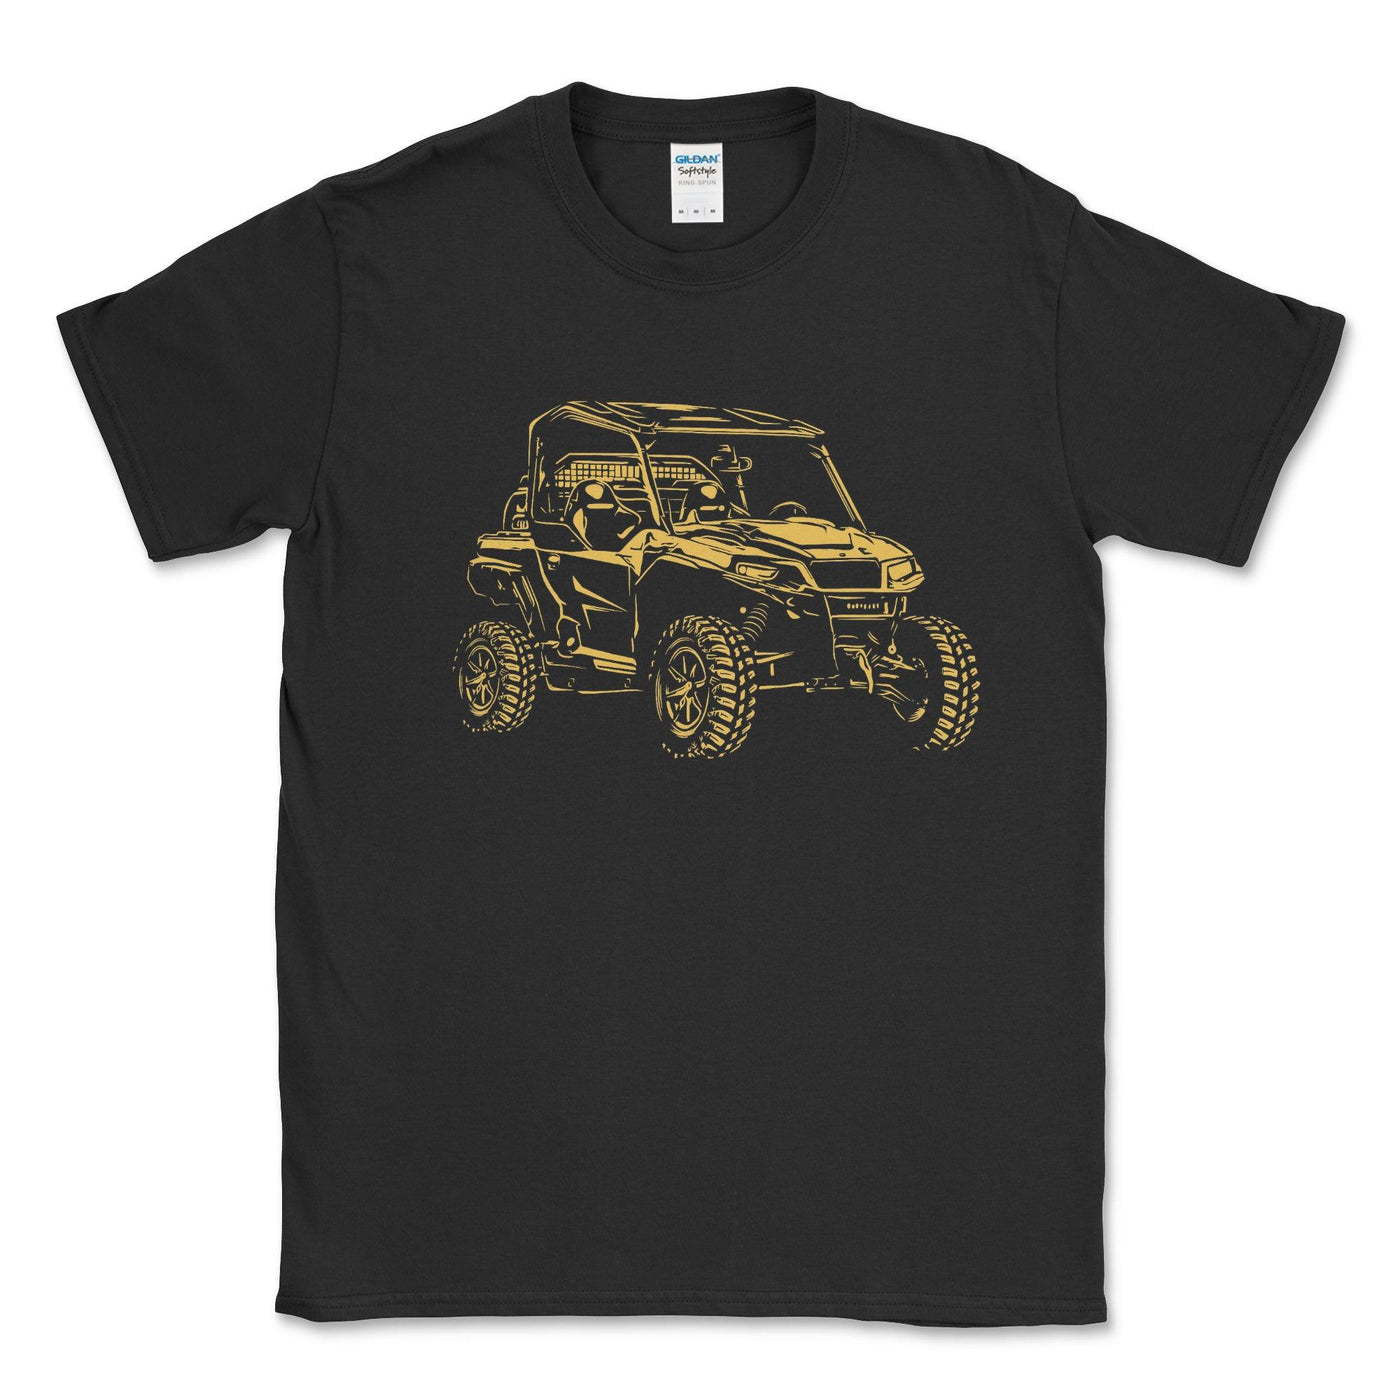 Big and Tall-SXS Graphic T-shirt - Goats Trail